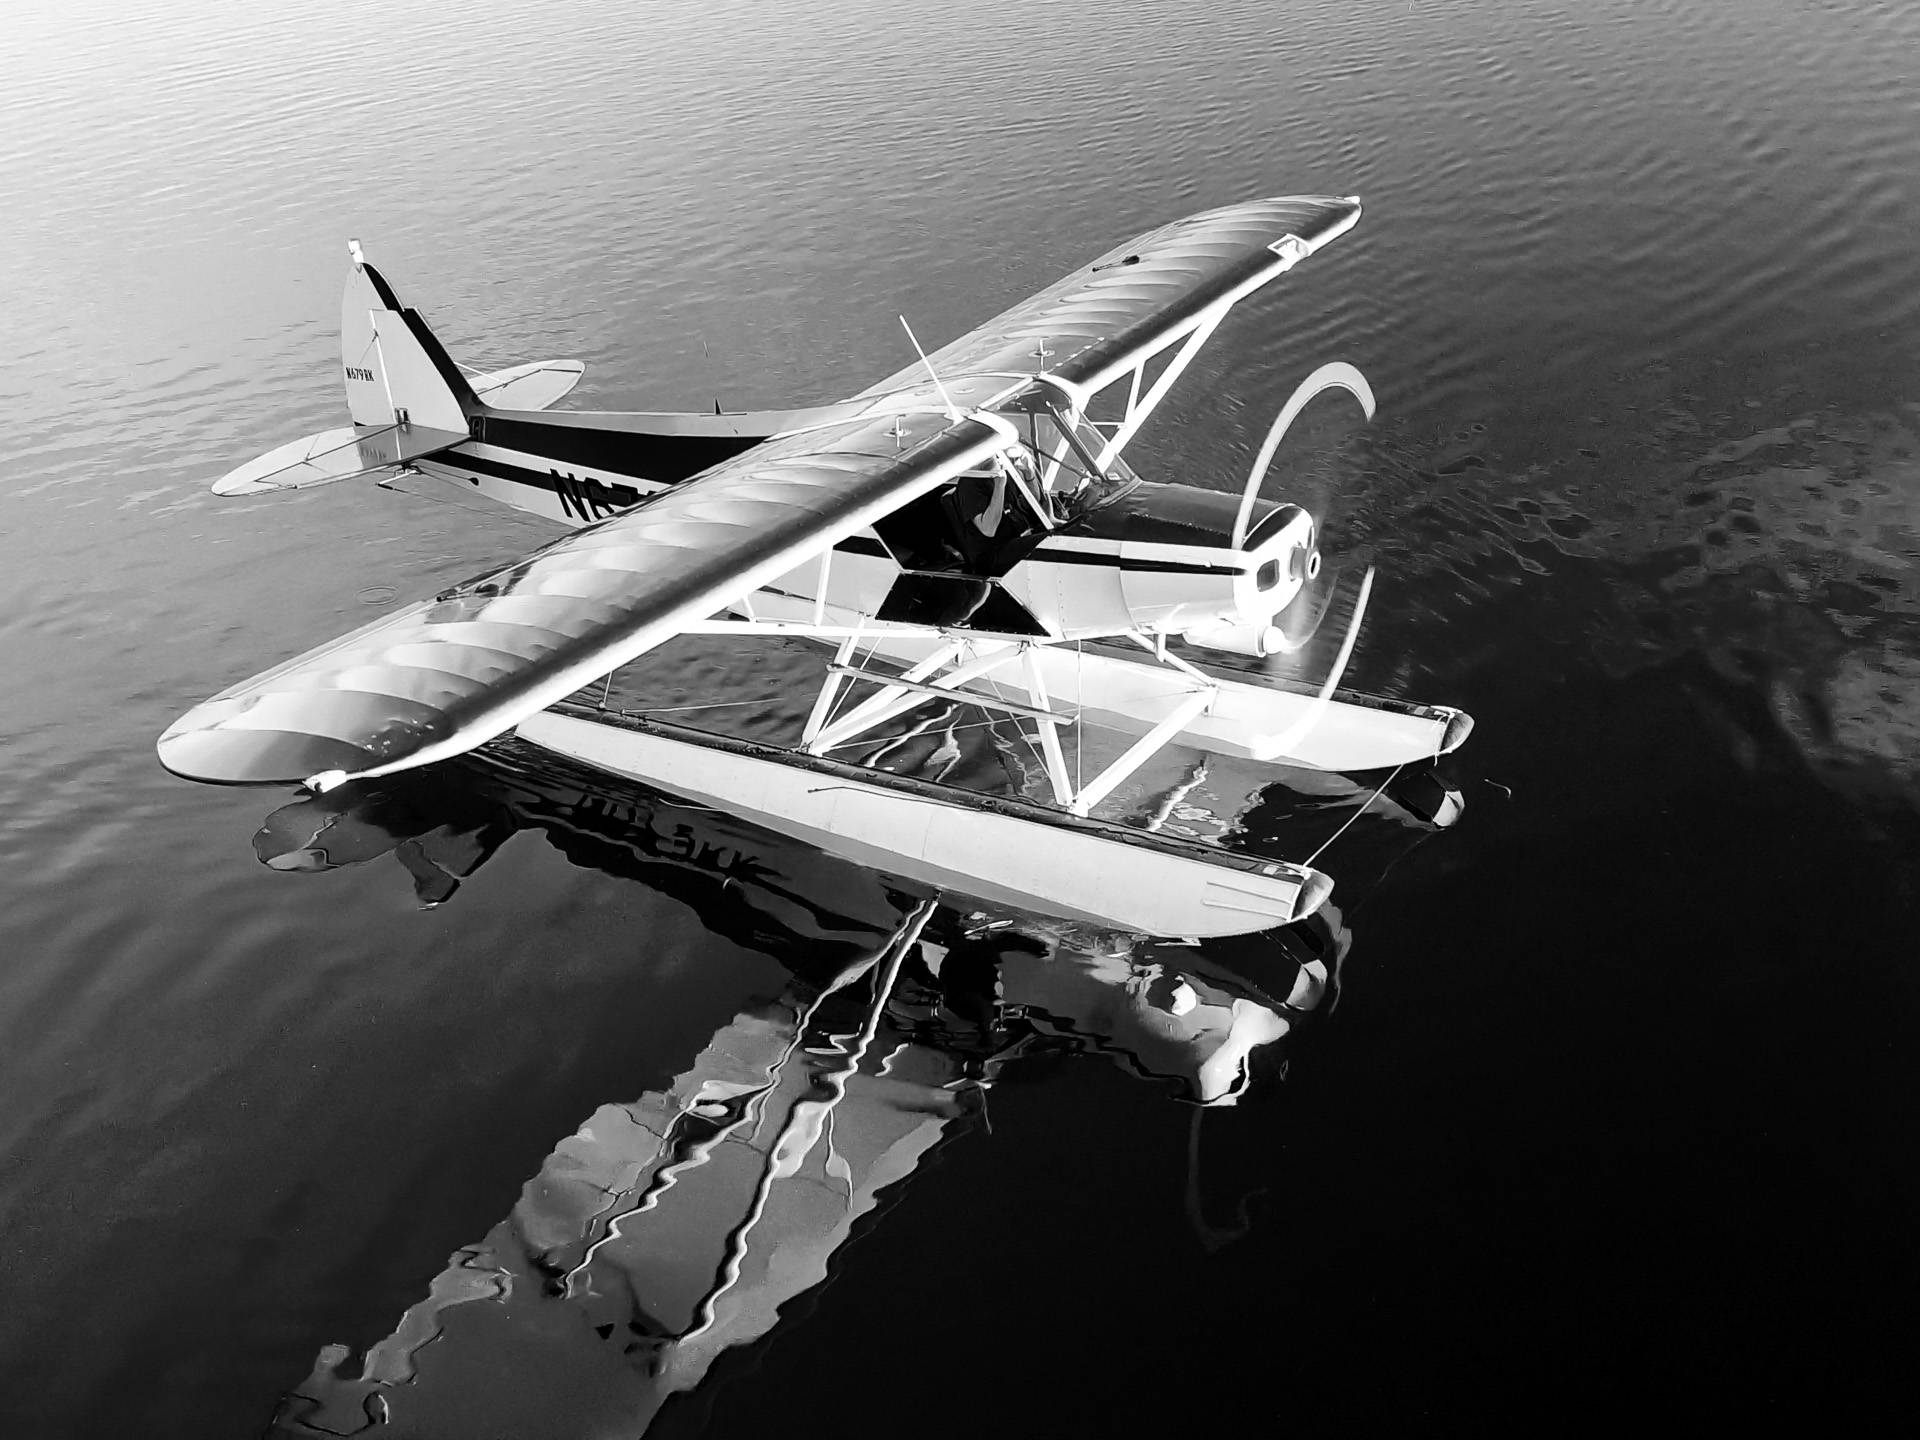 Dan Hubert, owner and pilot for Last Frontier Aeria, said drones can be used for a lot more than photography and videography but they do produce useful images during the Juneau Chamber of Commerce’s weekly luncheon at the Moose Lodge on Thursday, Dec. 20, 2018. This photo depicts a two-seat Piper Supercub on floats after startup on a lake in the Tanana Valley during autumn. (Courtesy Photo | Last Frontier Aerial, LLC (C) 2018)